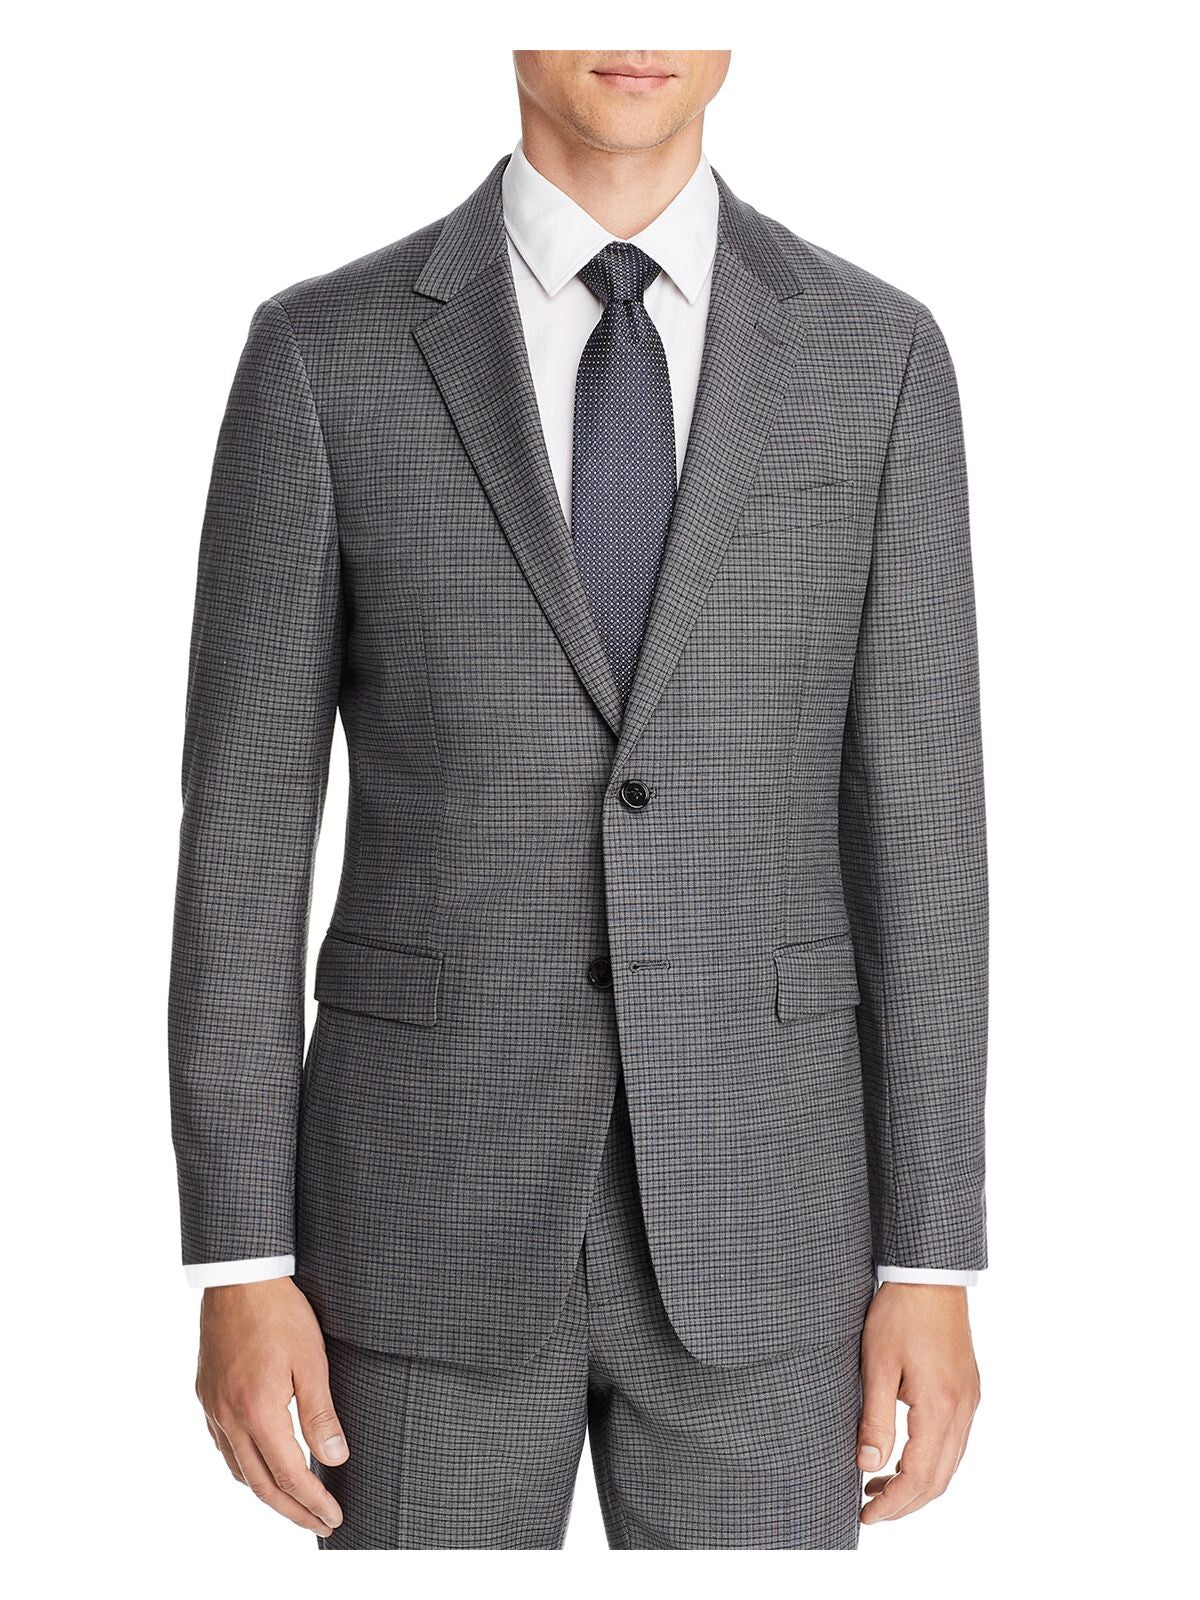 THEORY Mens Chambers Gray Single Breasted, Check Wool Blend Blazer Jacket 44R